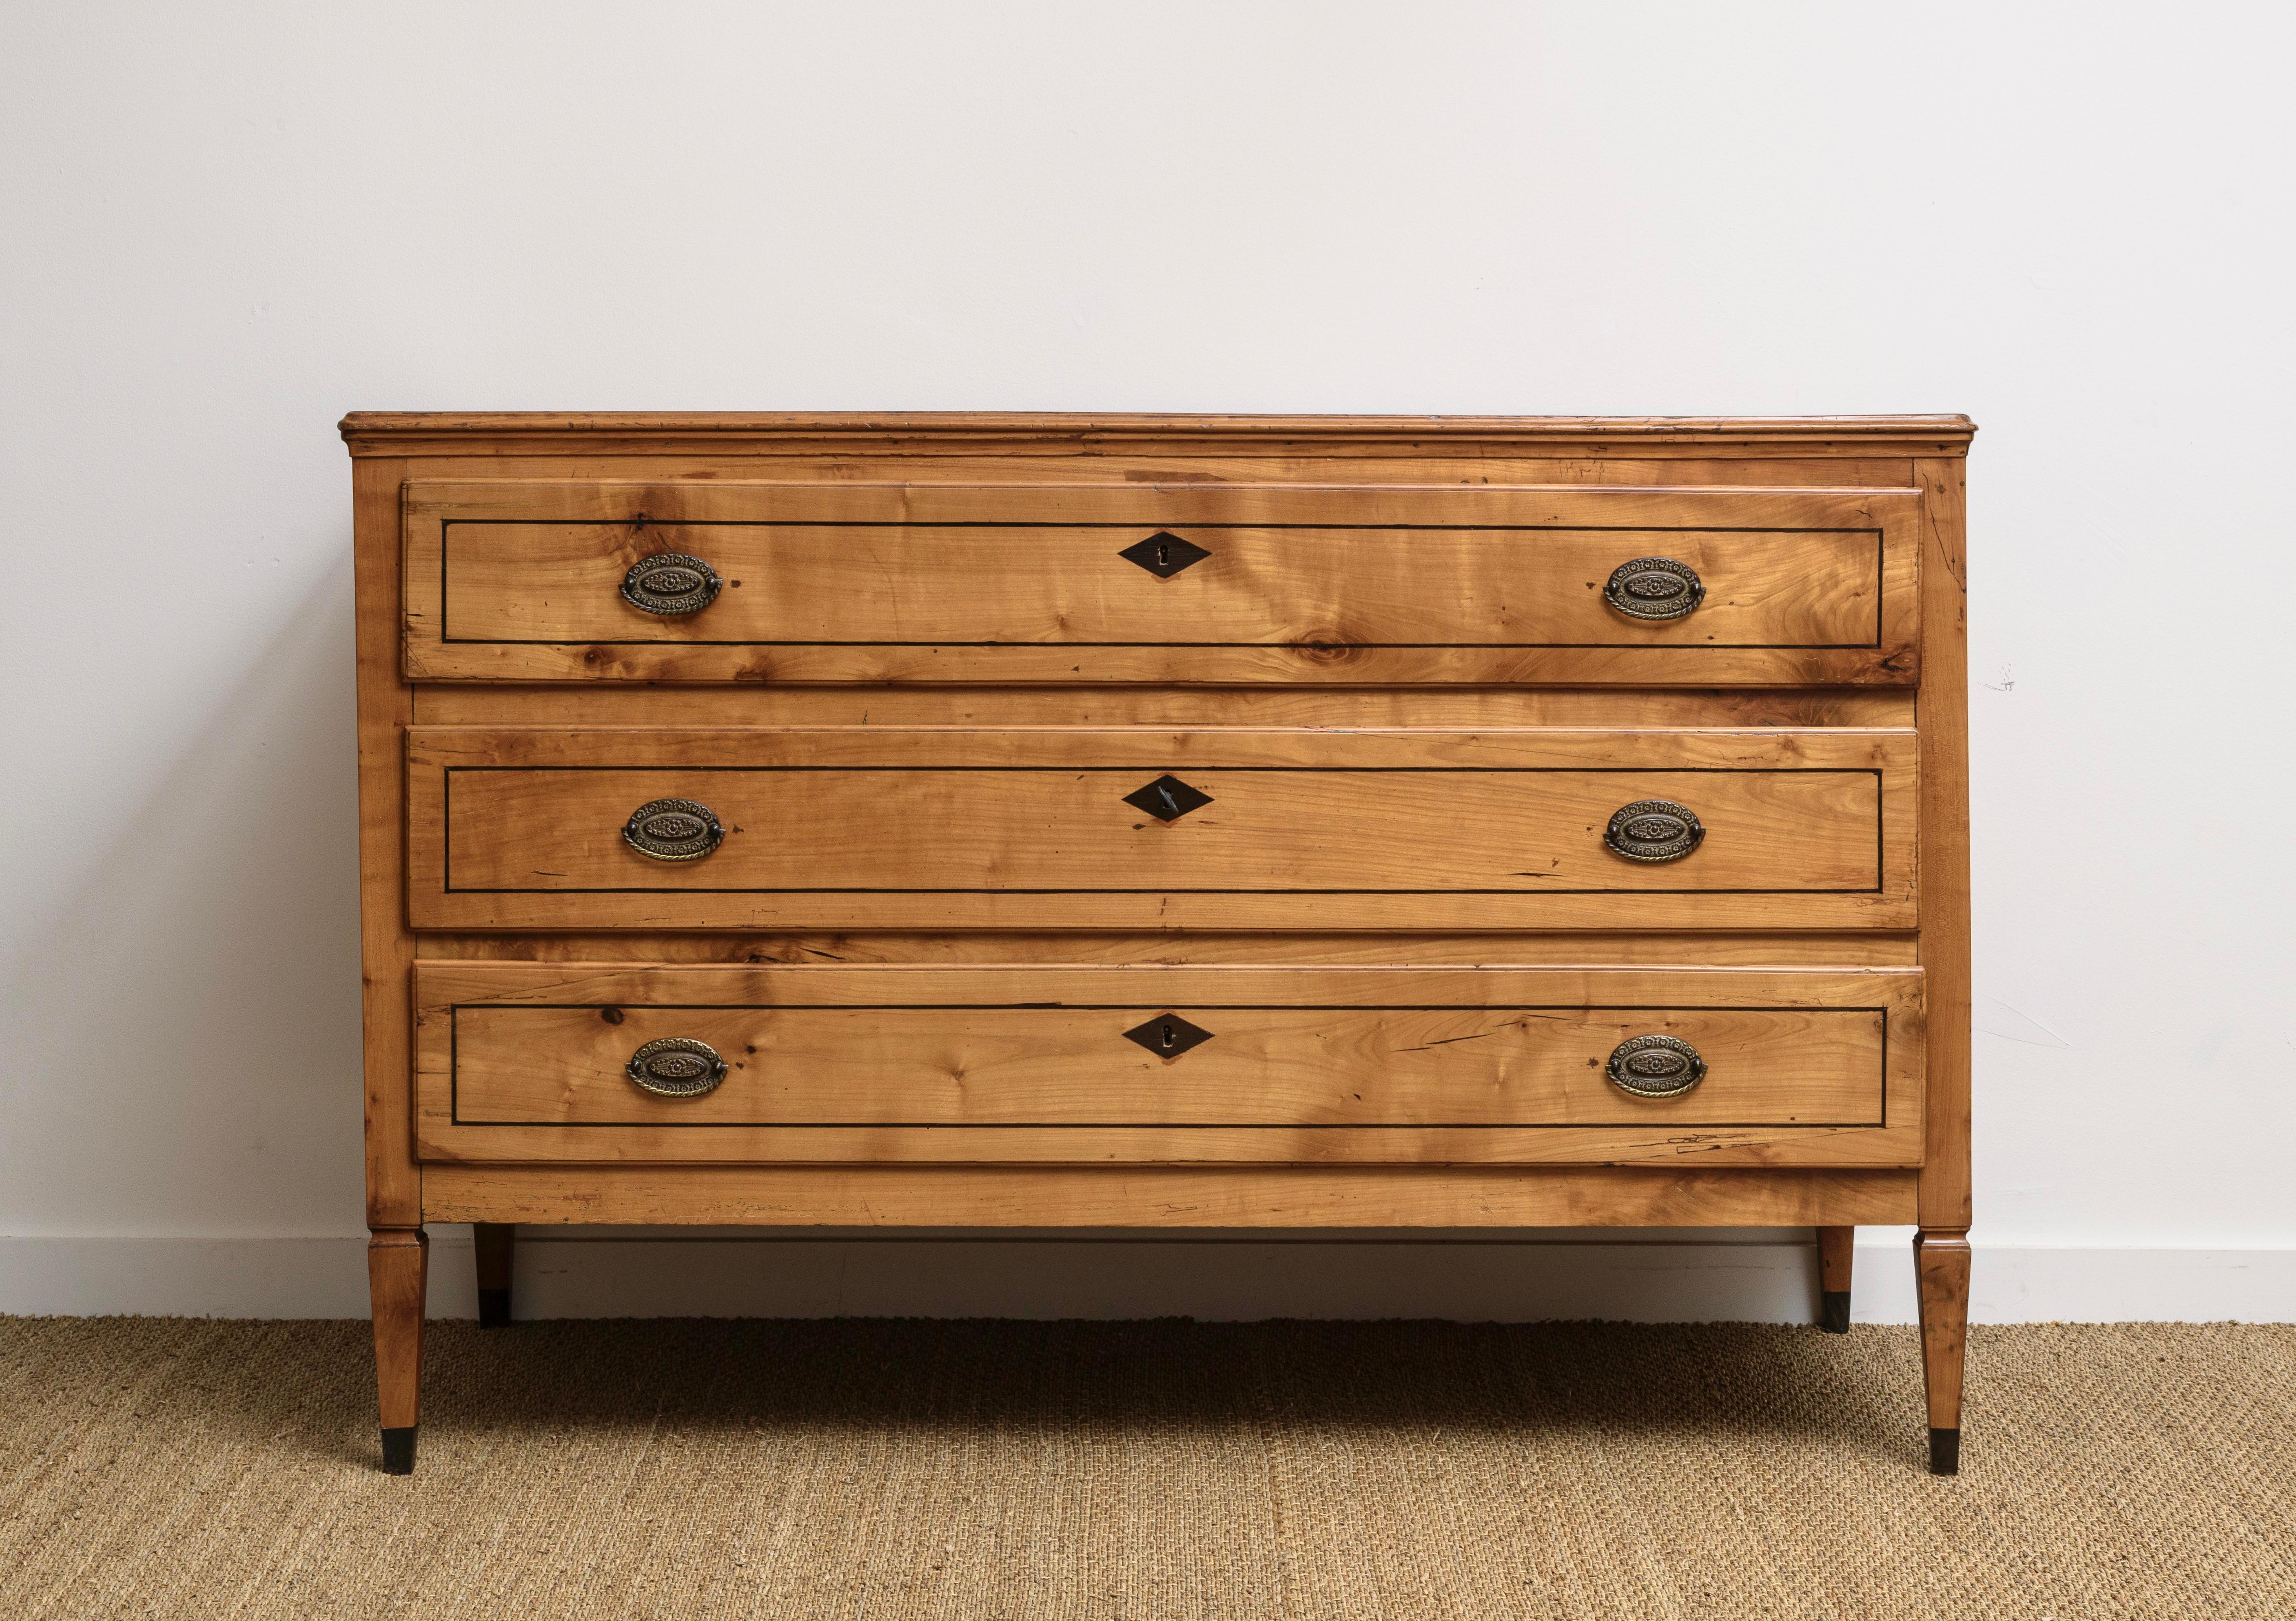 An Italian Cherry Neoclacial-style Commode, from  Bologna, with three long drawers, the drawers and posts decorated with Pearwood designs, with matching design on flat panel sides on tapering legs,   Large chest great for storage.   Ca 1850  With